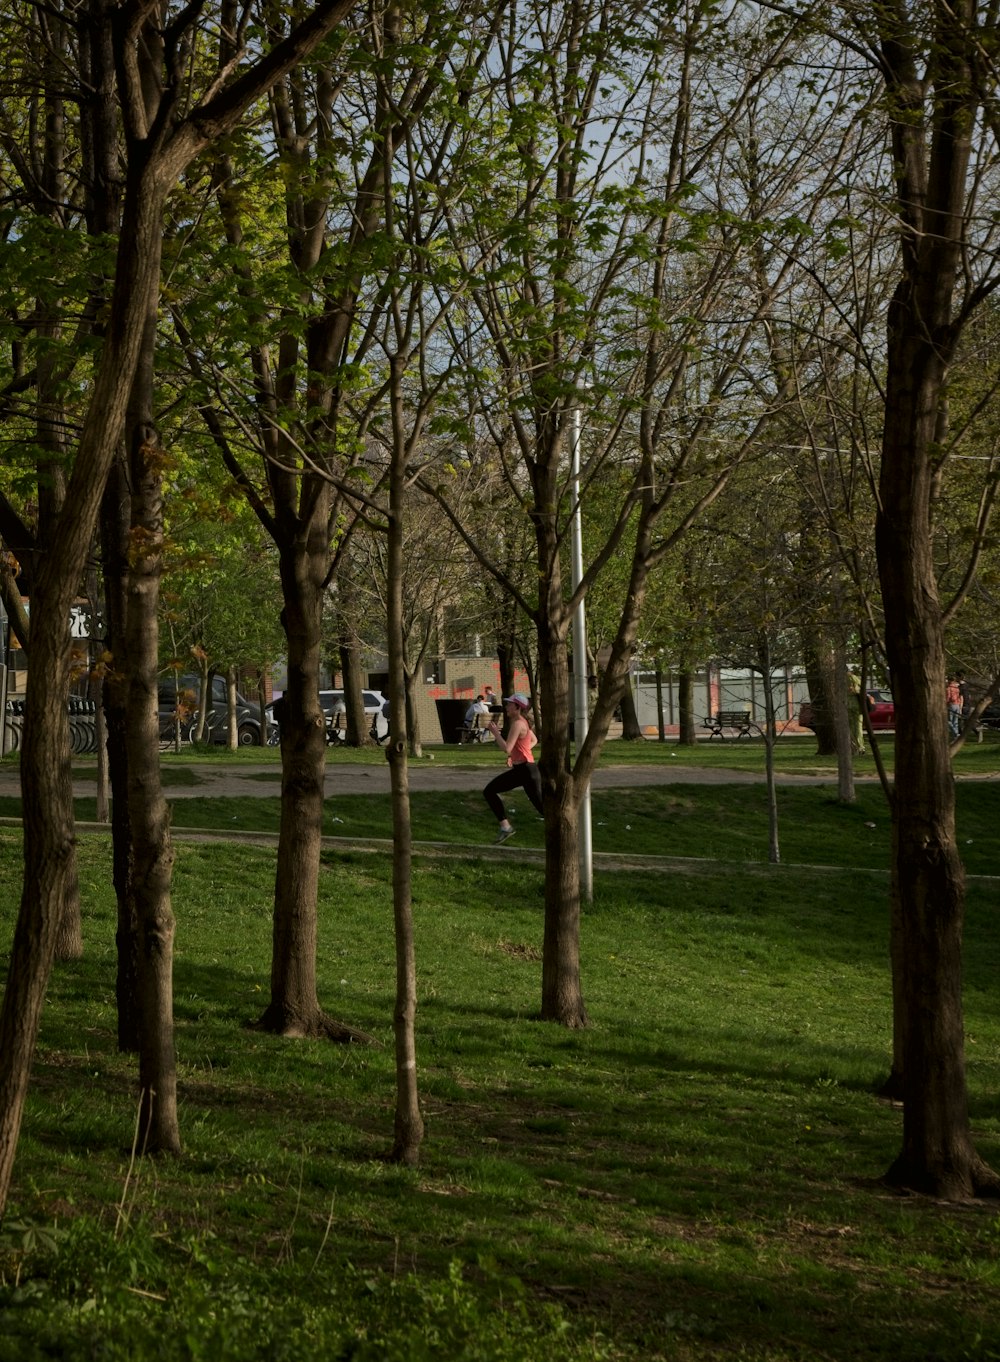 a park with lots of trees and a person on a skateboard